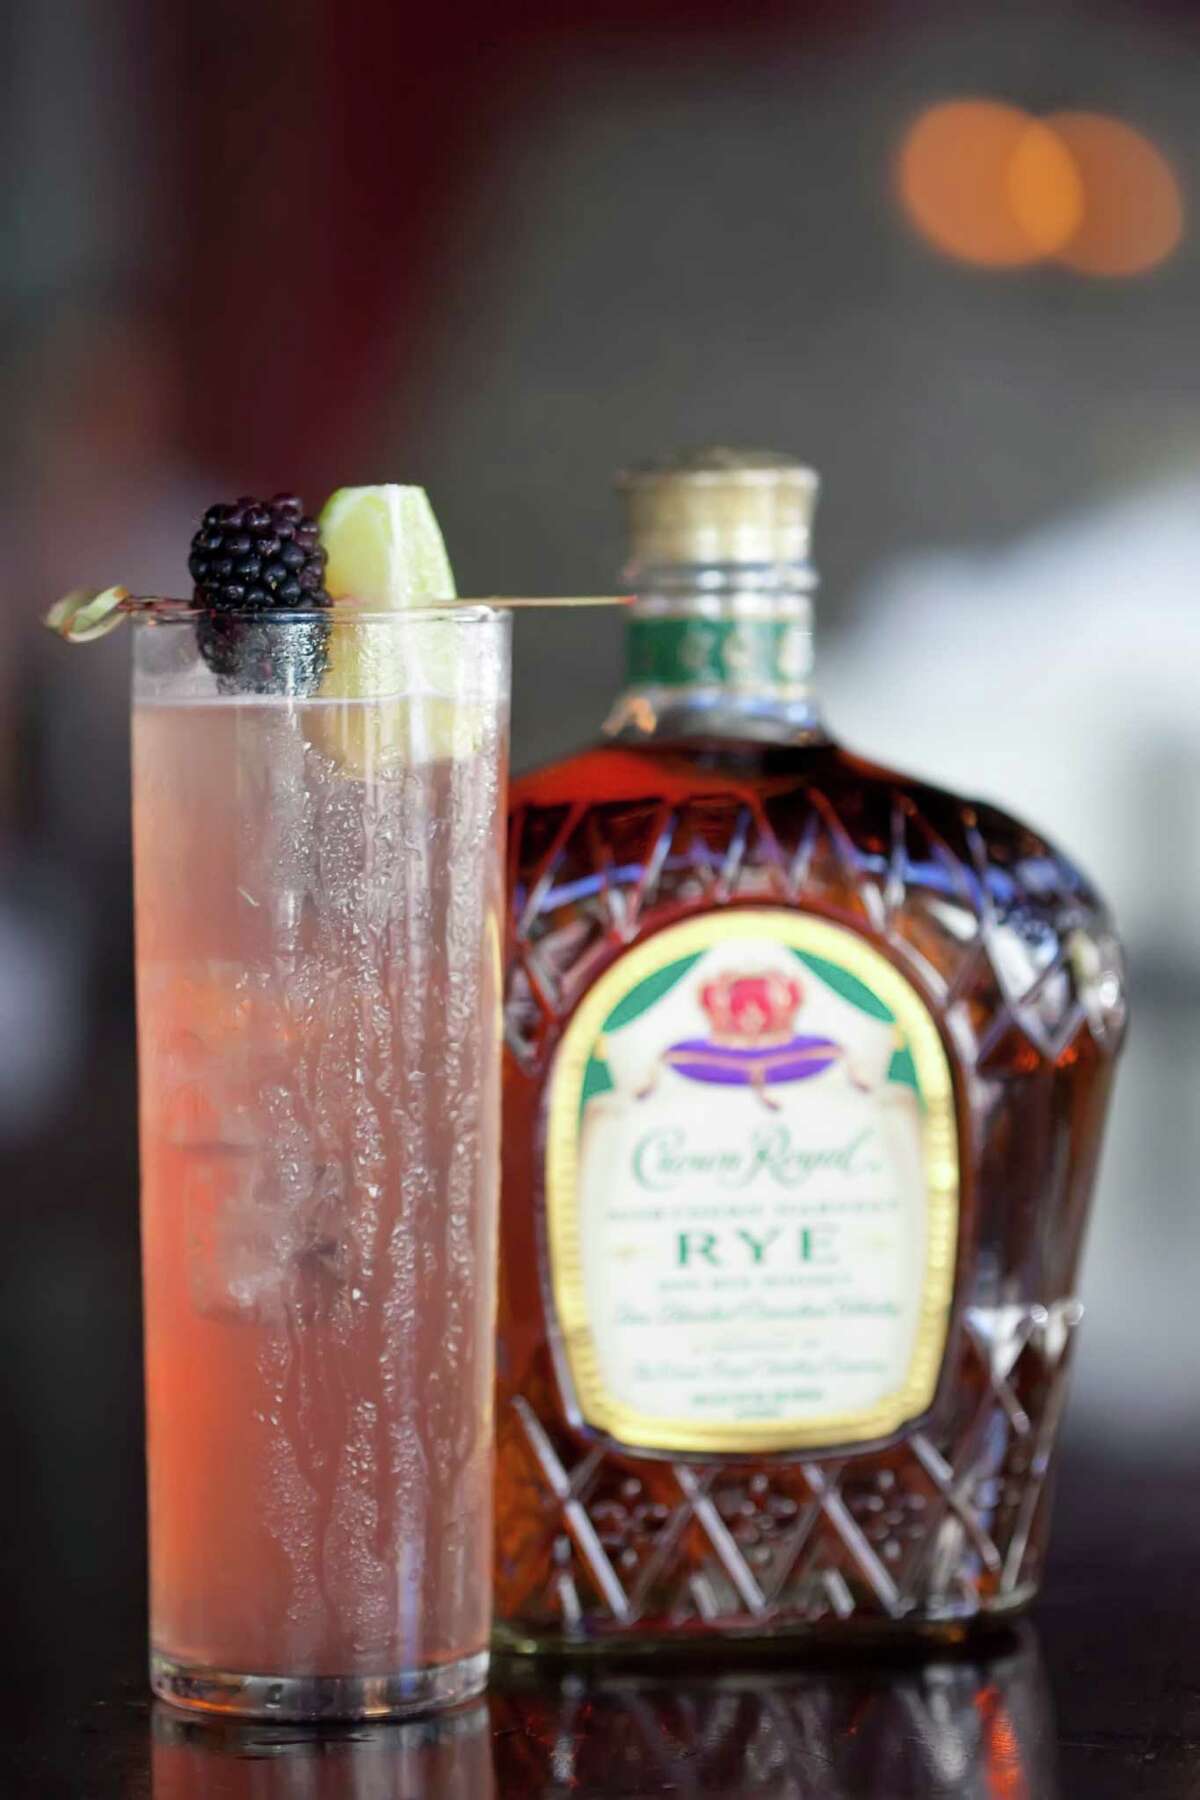 Pamplemousse Punch is a cocktail made with Crown Royal Northern Harvest Rye.